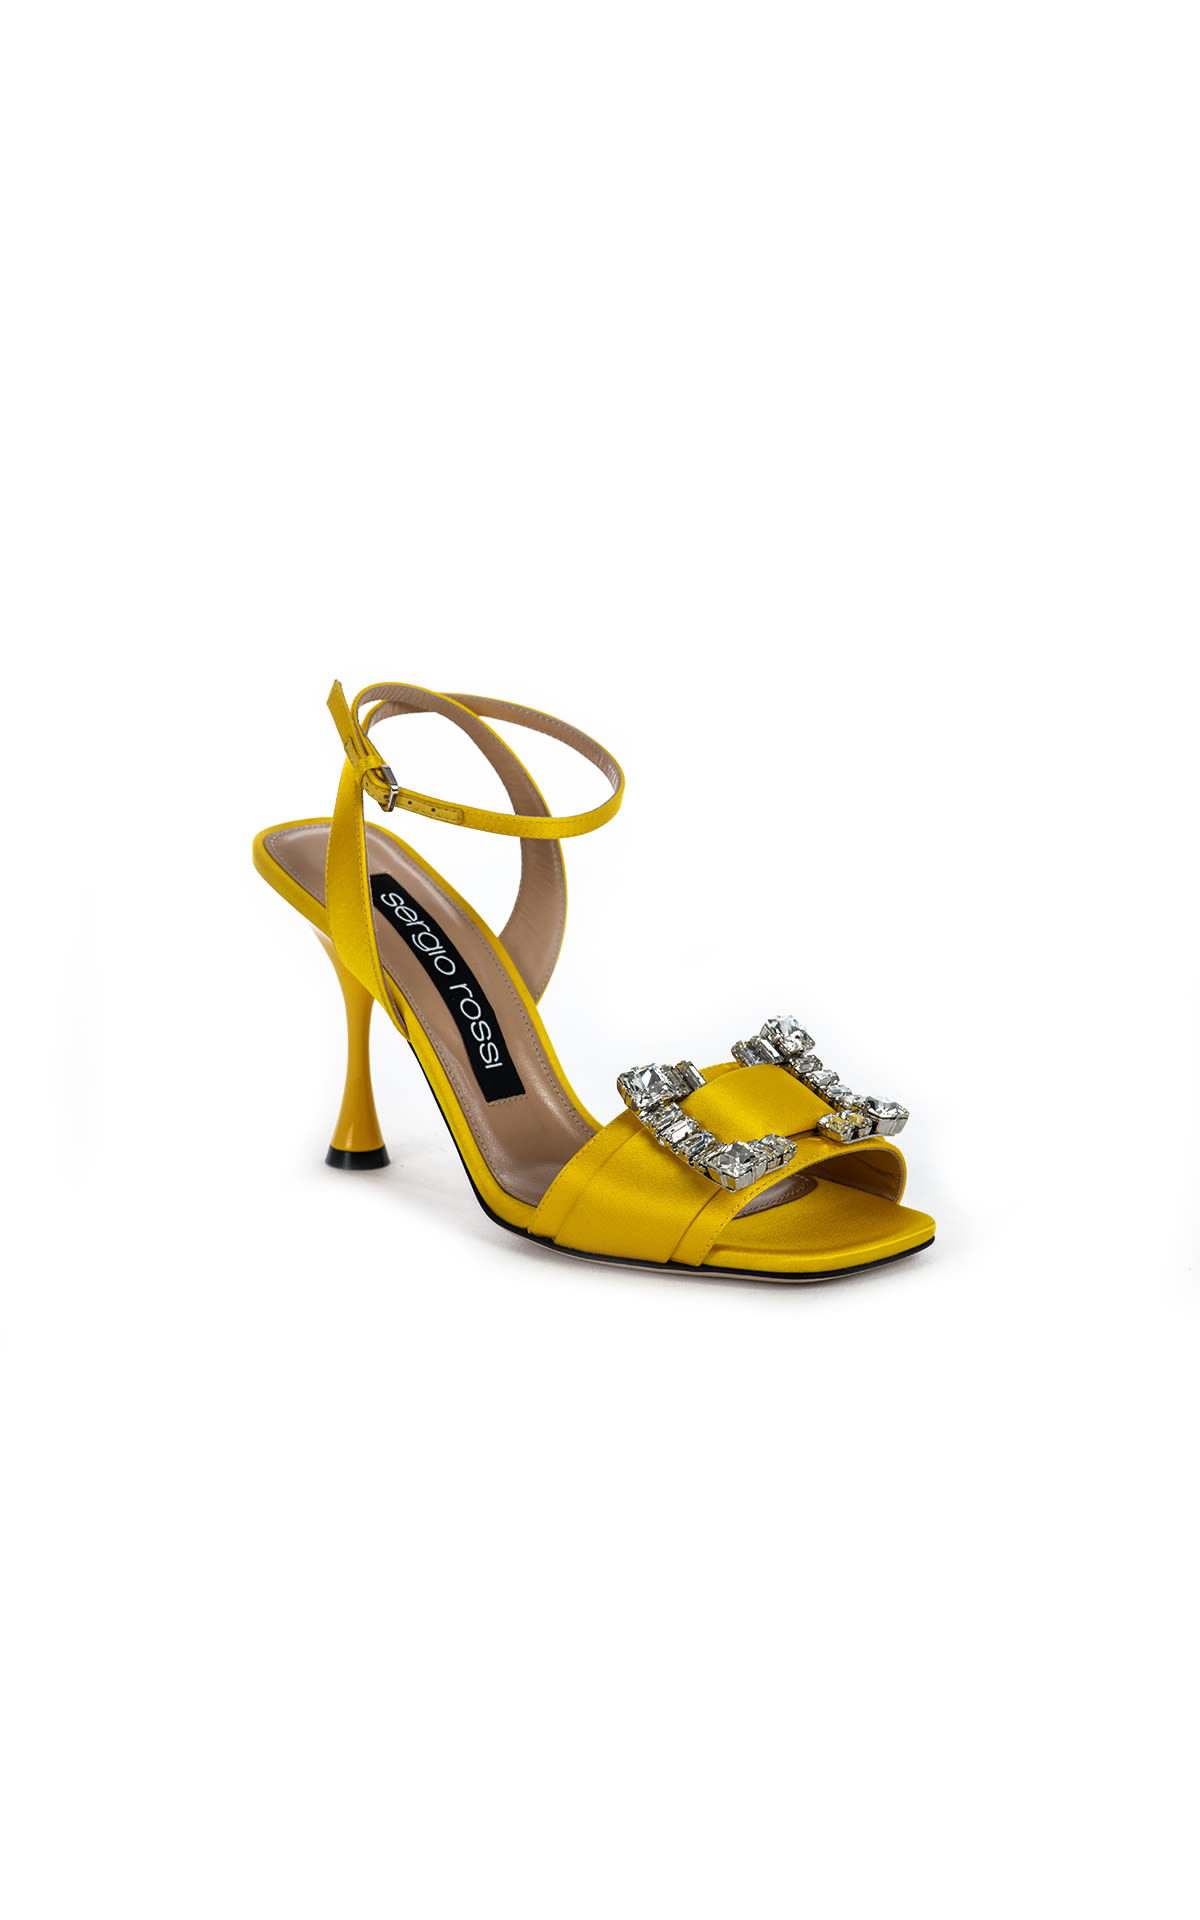 Sergio Rossi Sandals with crystal buckle